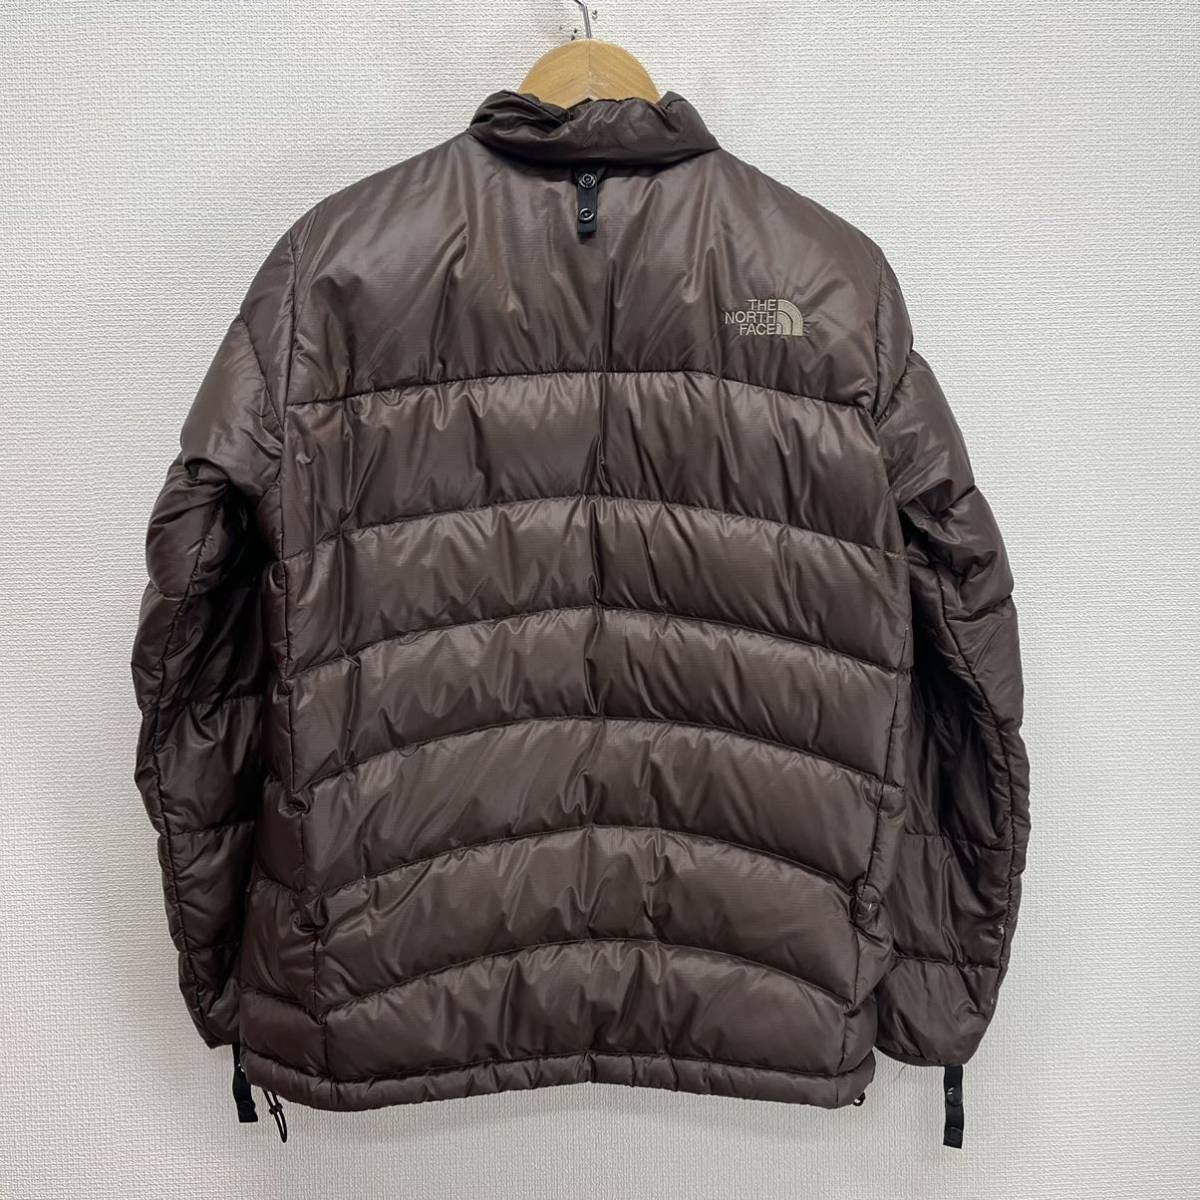 THE NORTH FACE ノースフェイス NP61208 ZEUS TRICLIMATE JACKET 